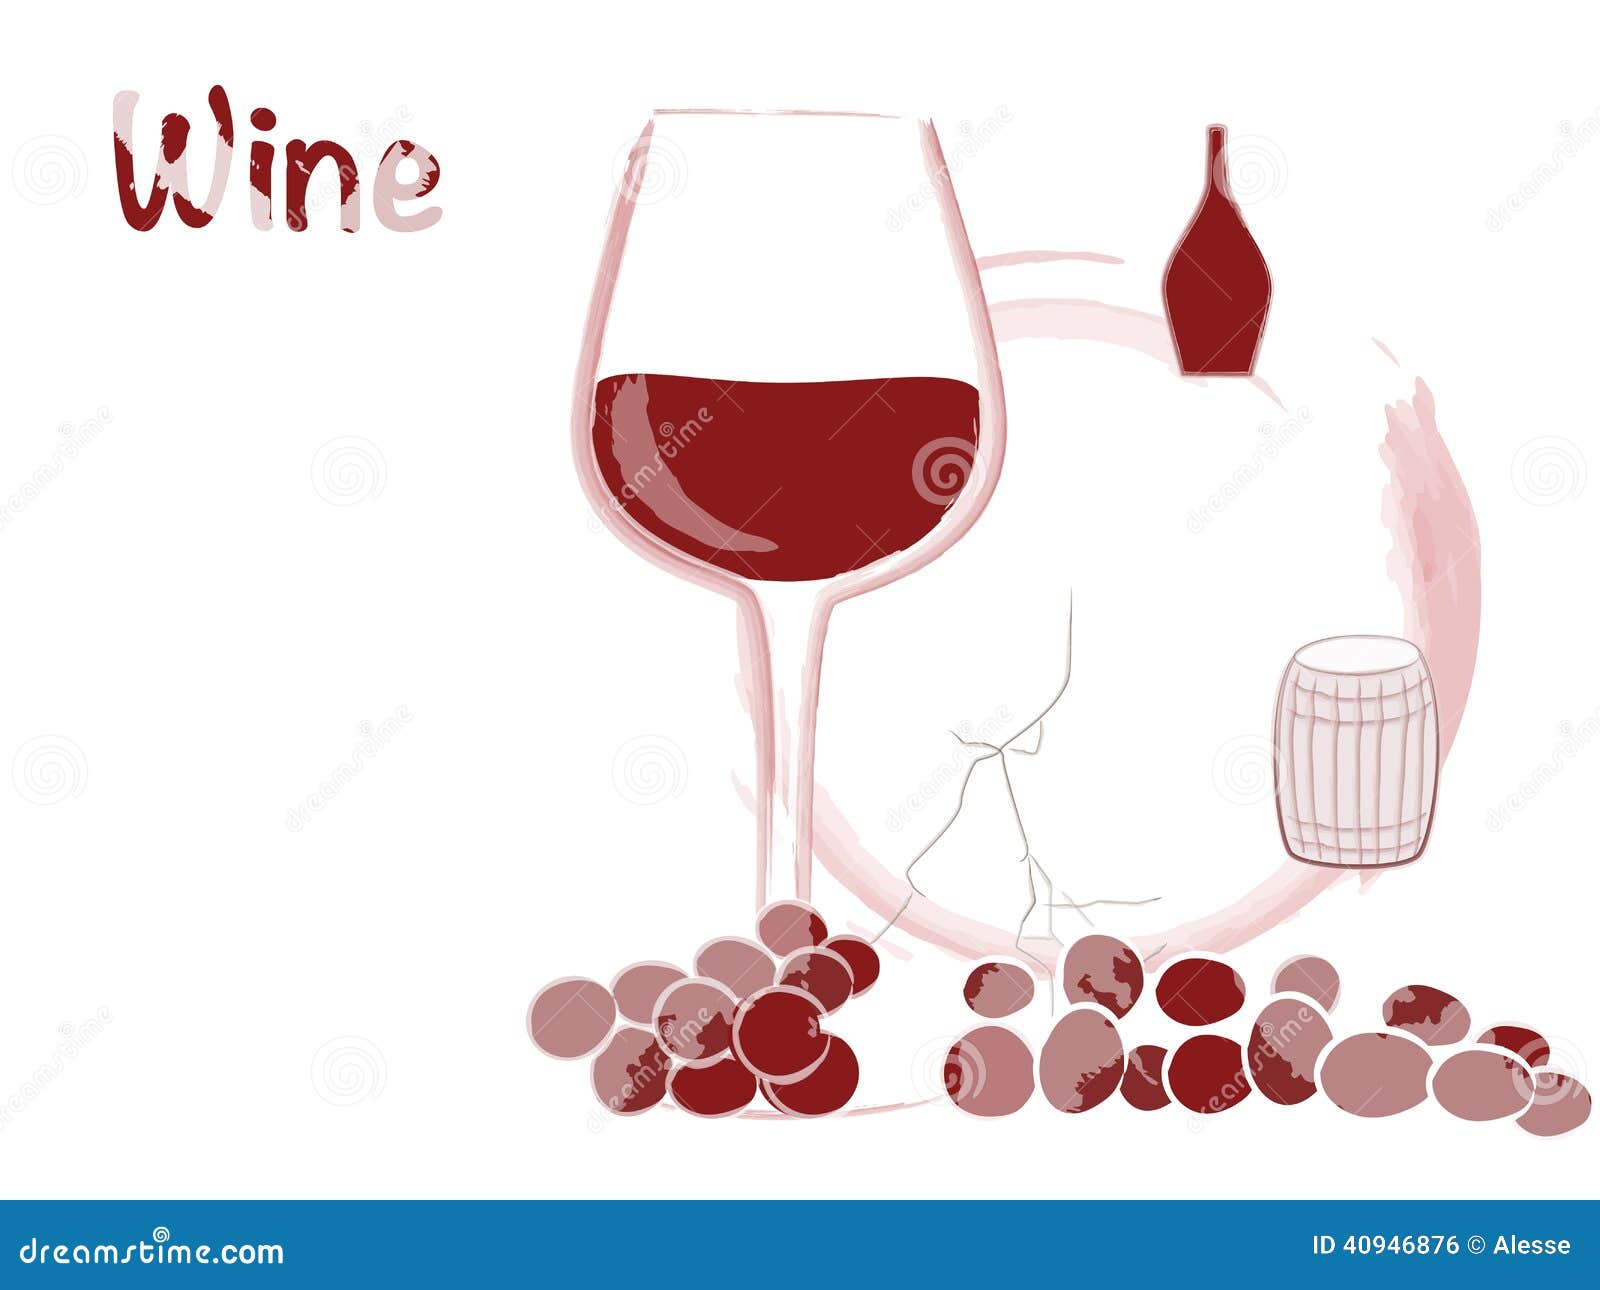 Red wine stock vector. Illustration of food, label, process - 40946876